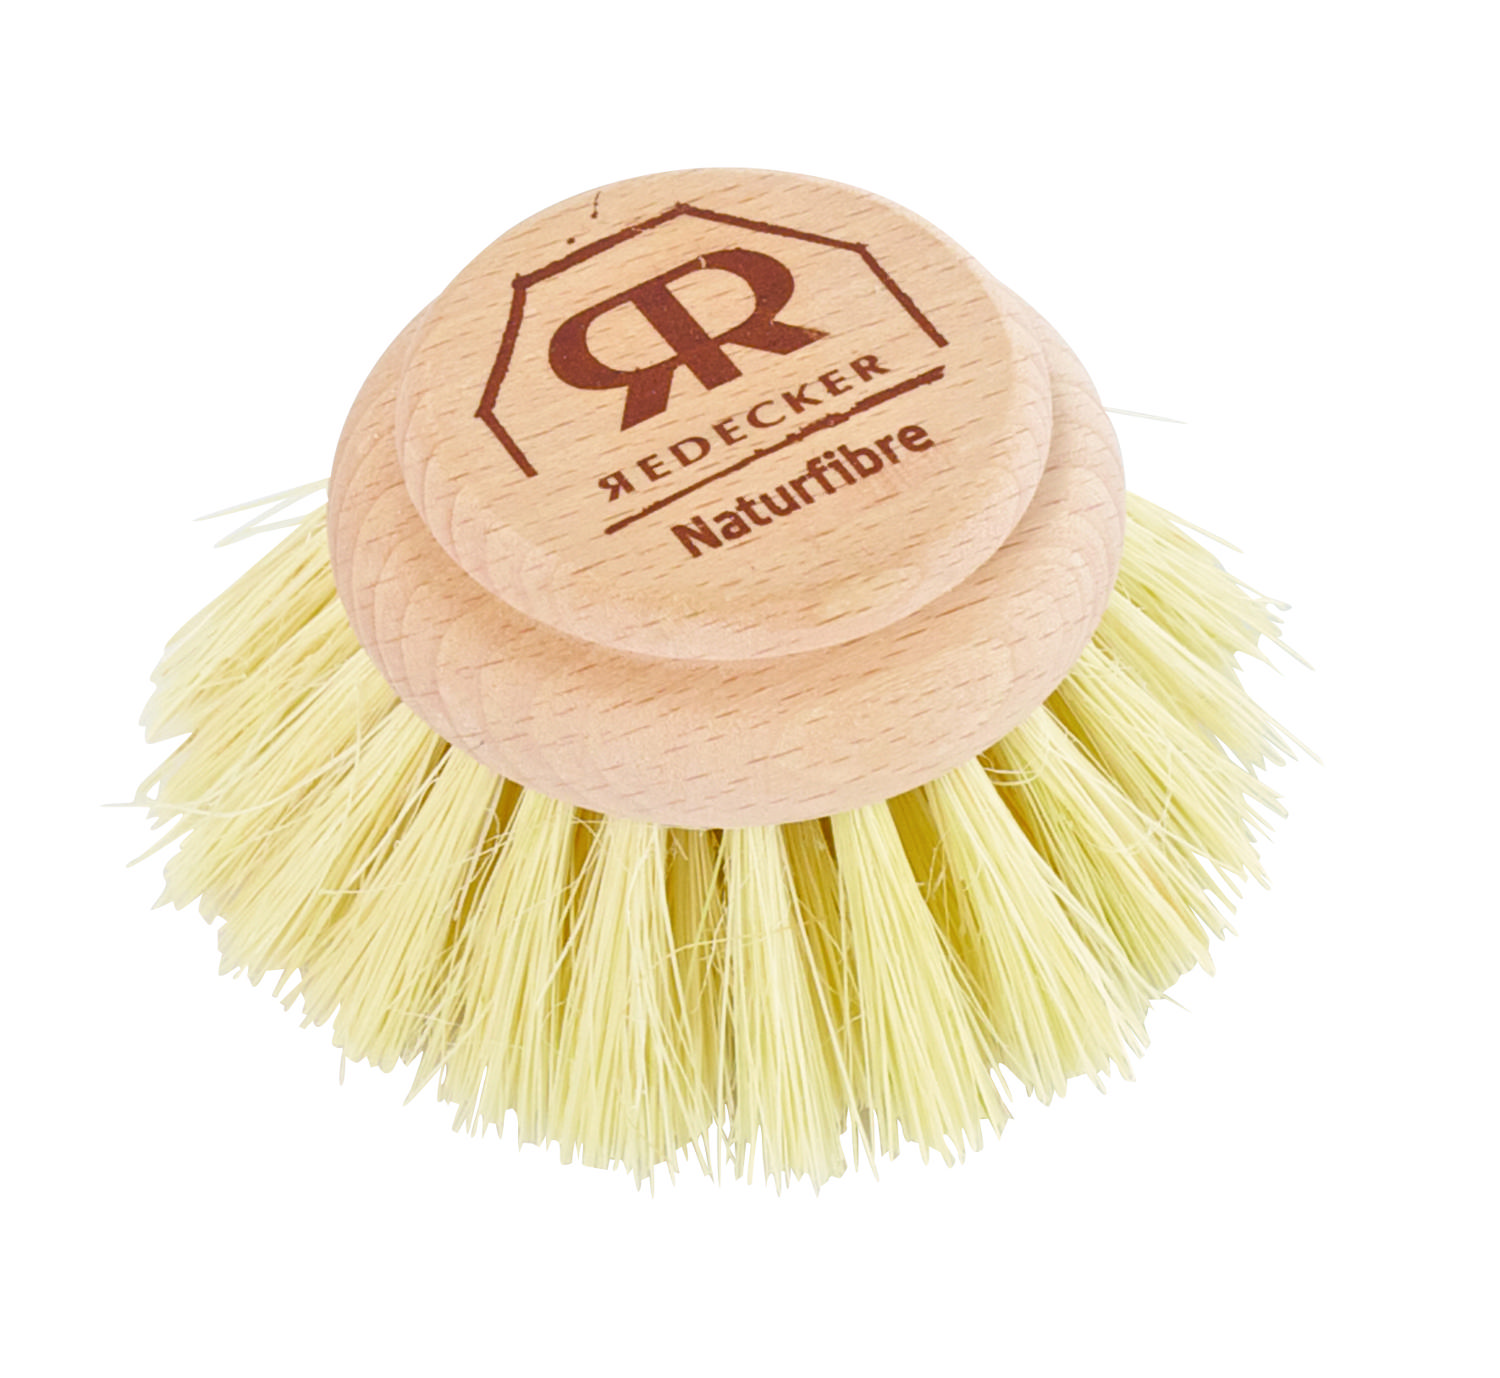 Washing up brush - Replacement Head only - Stiff tampico fibre 5cm